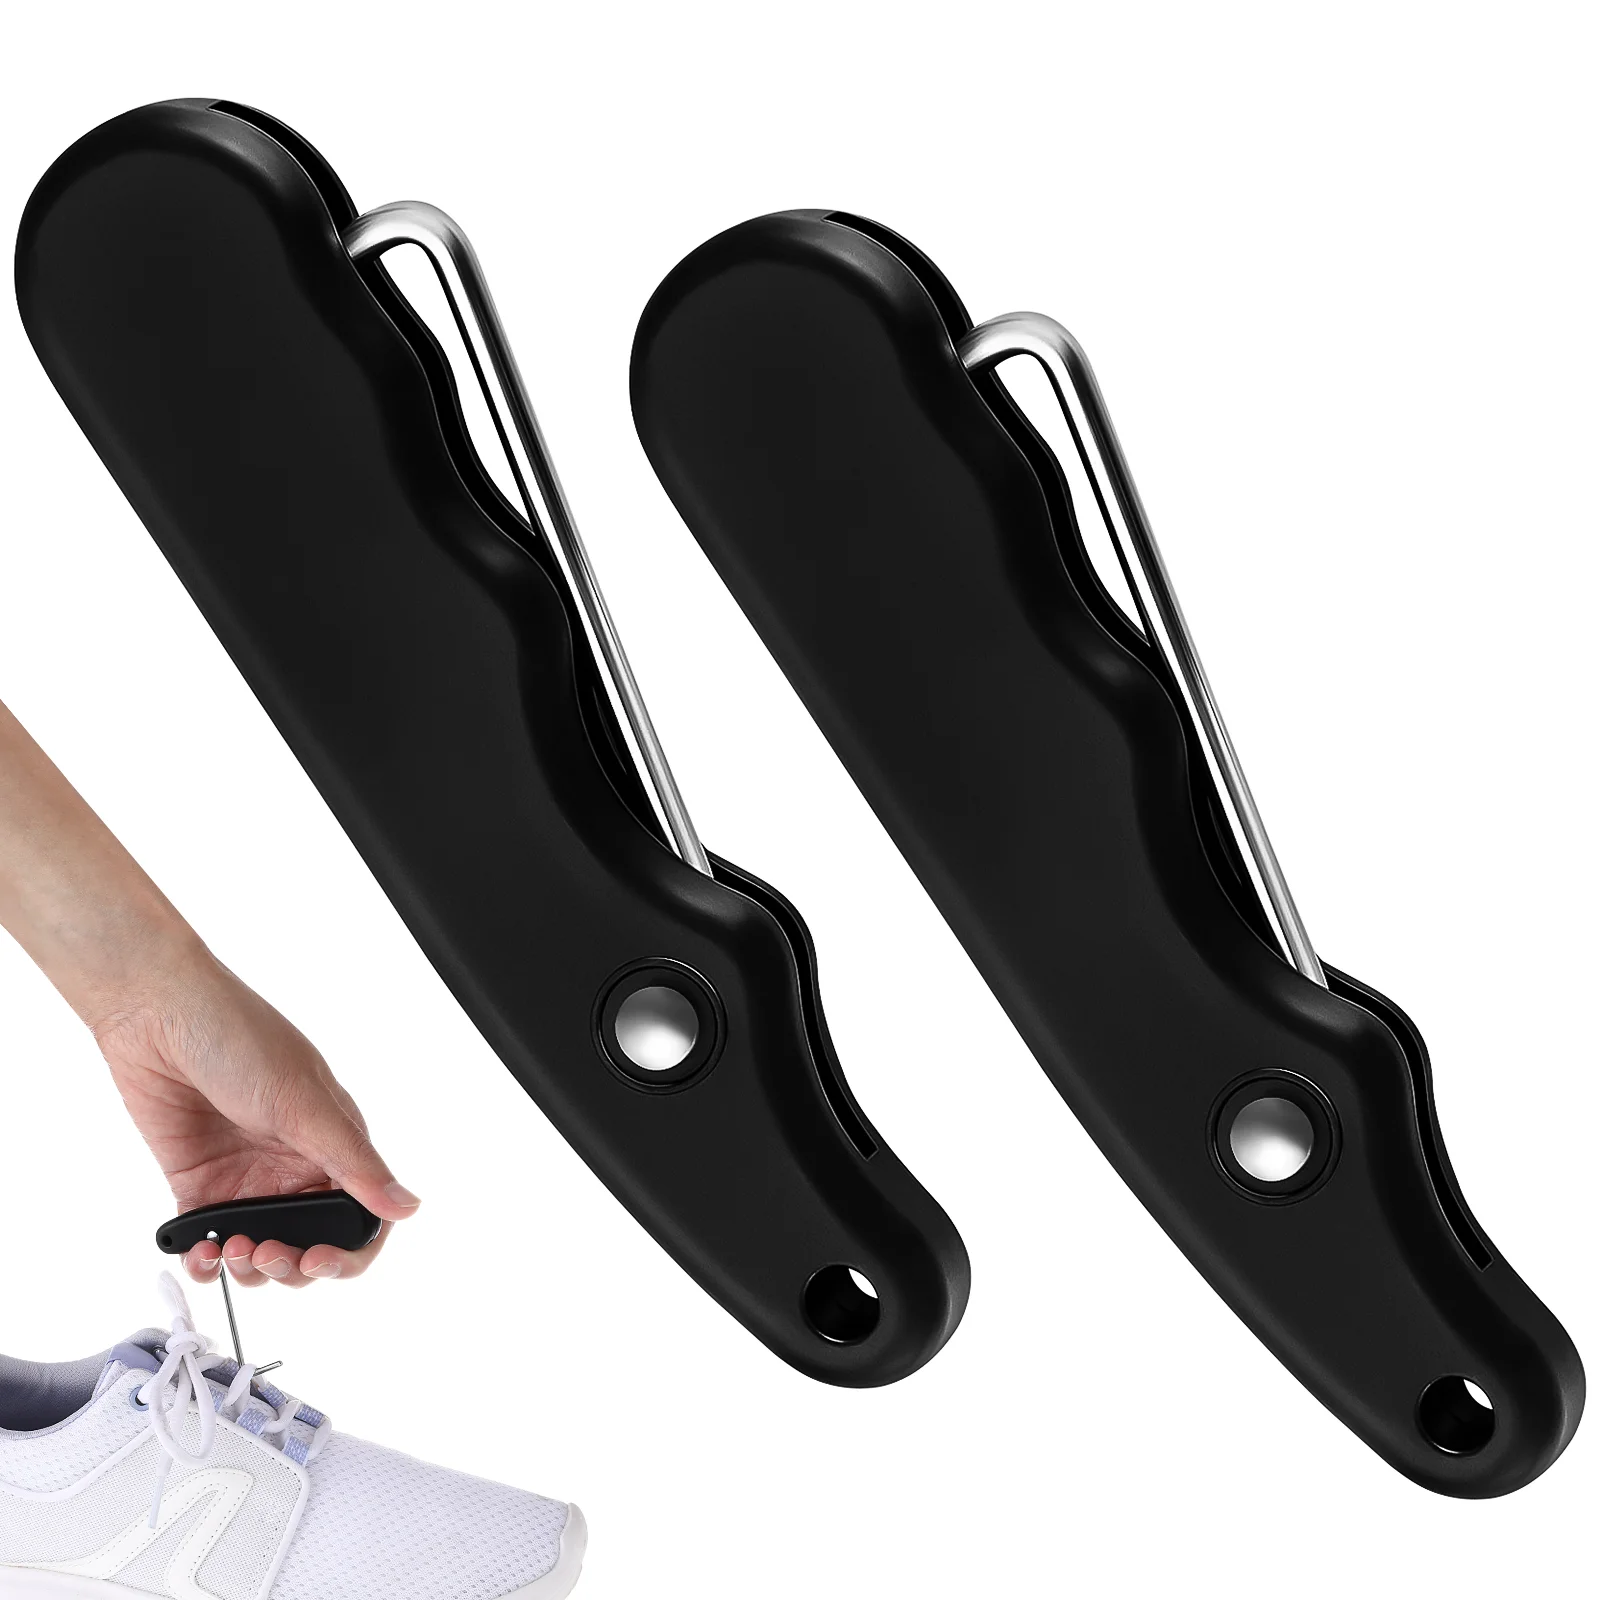 

2 Pcs Pro Skateboard Ice Skates Lace Tightener Tool Skating Shoes Professional Shoelace Pp Plus Stainless Steel